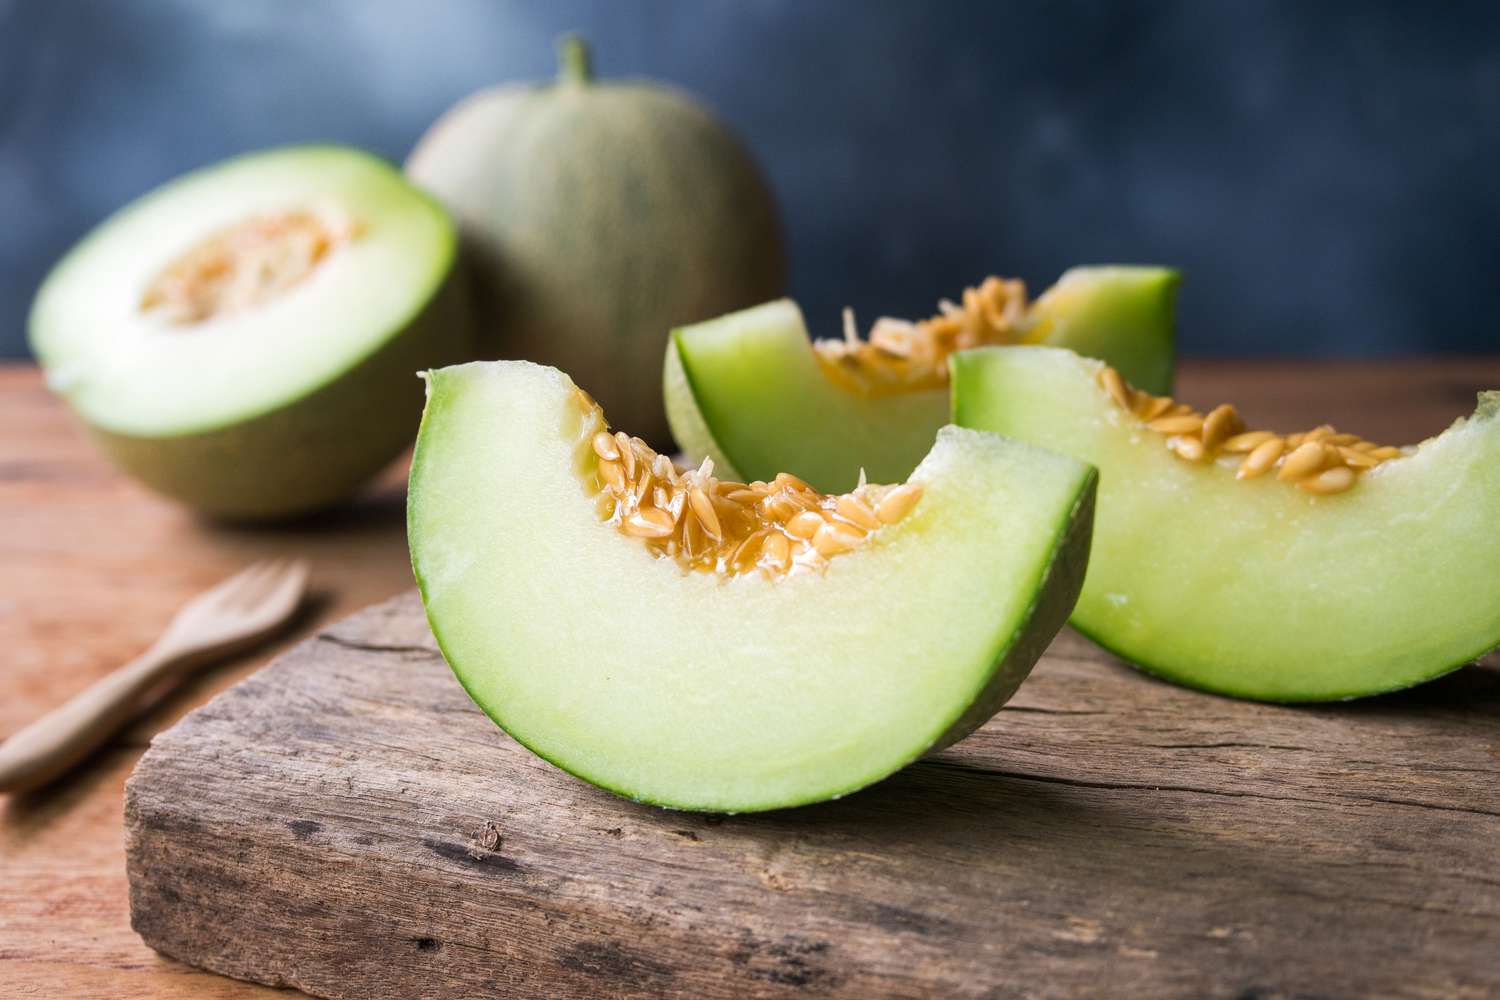 The Foolproof Trick To Spotting A Perfectly Ripe Honeydew!